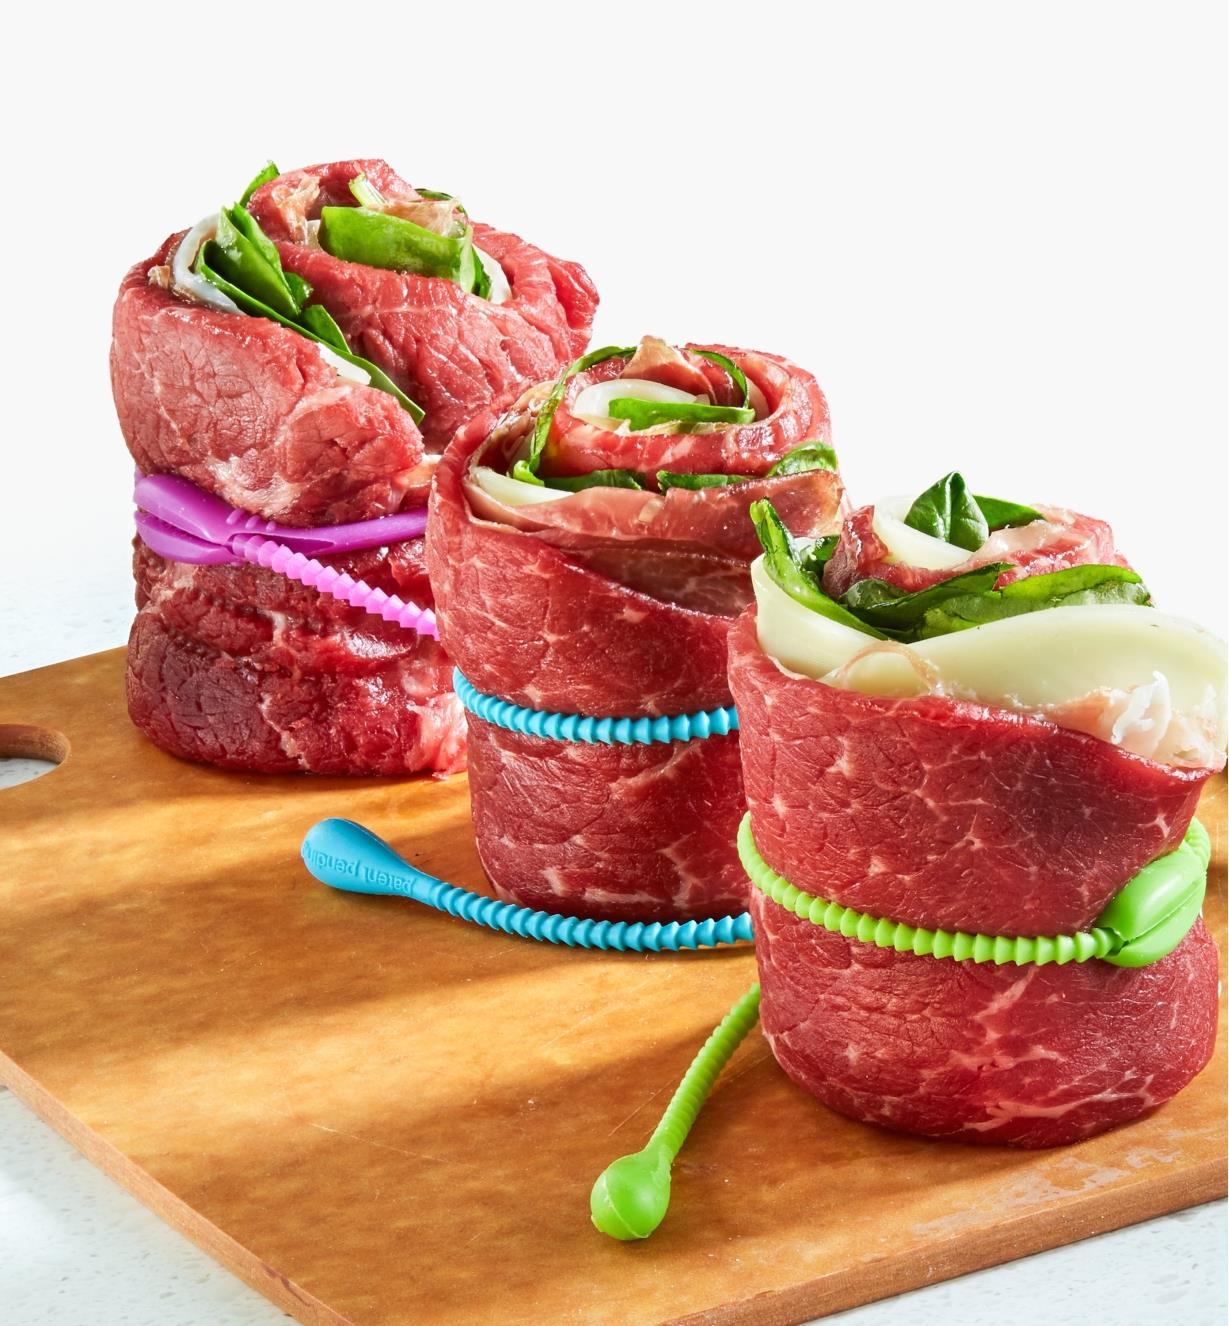 Three stuffed beef roulades secured with FoodLoop, ready for cooking